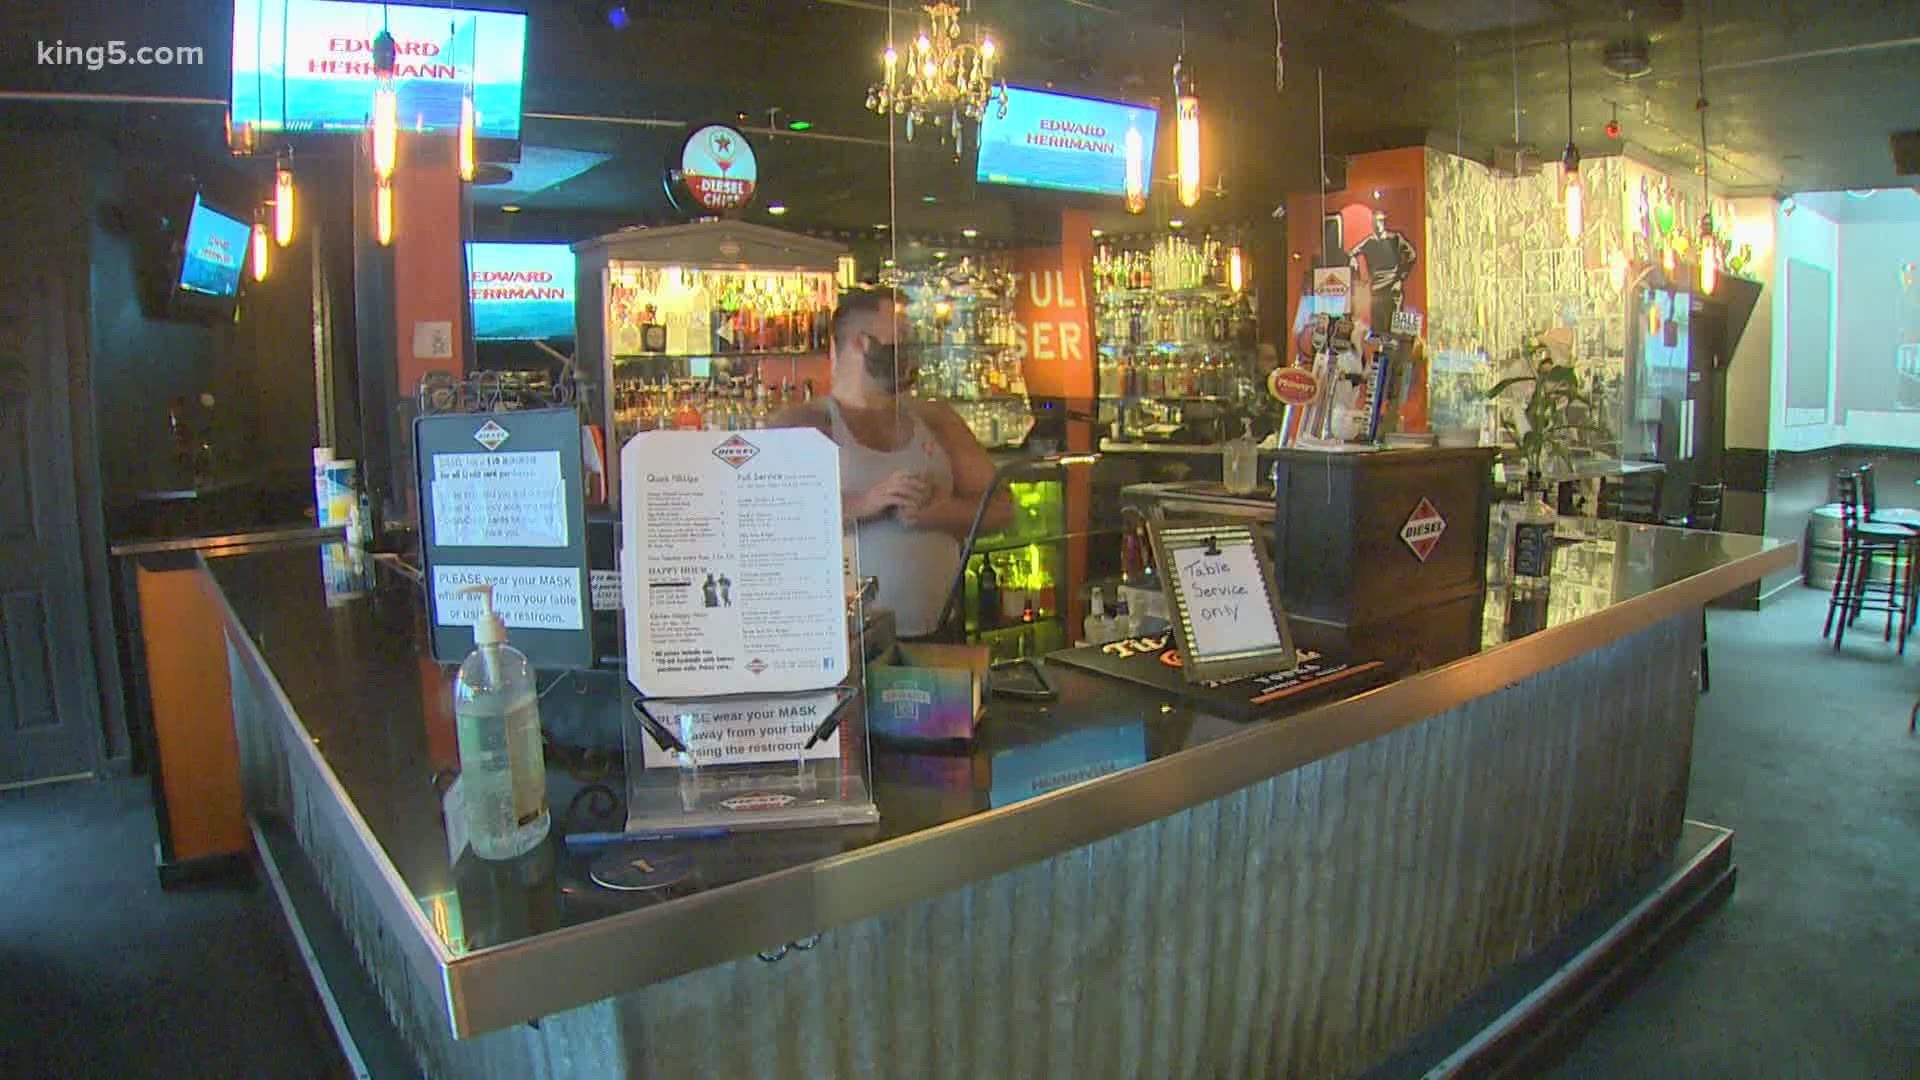 Some bars and restaurants face an uncertain future after new restrictions were imposed to try to curb the upswing of coronavirus throughout the state.